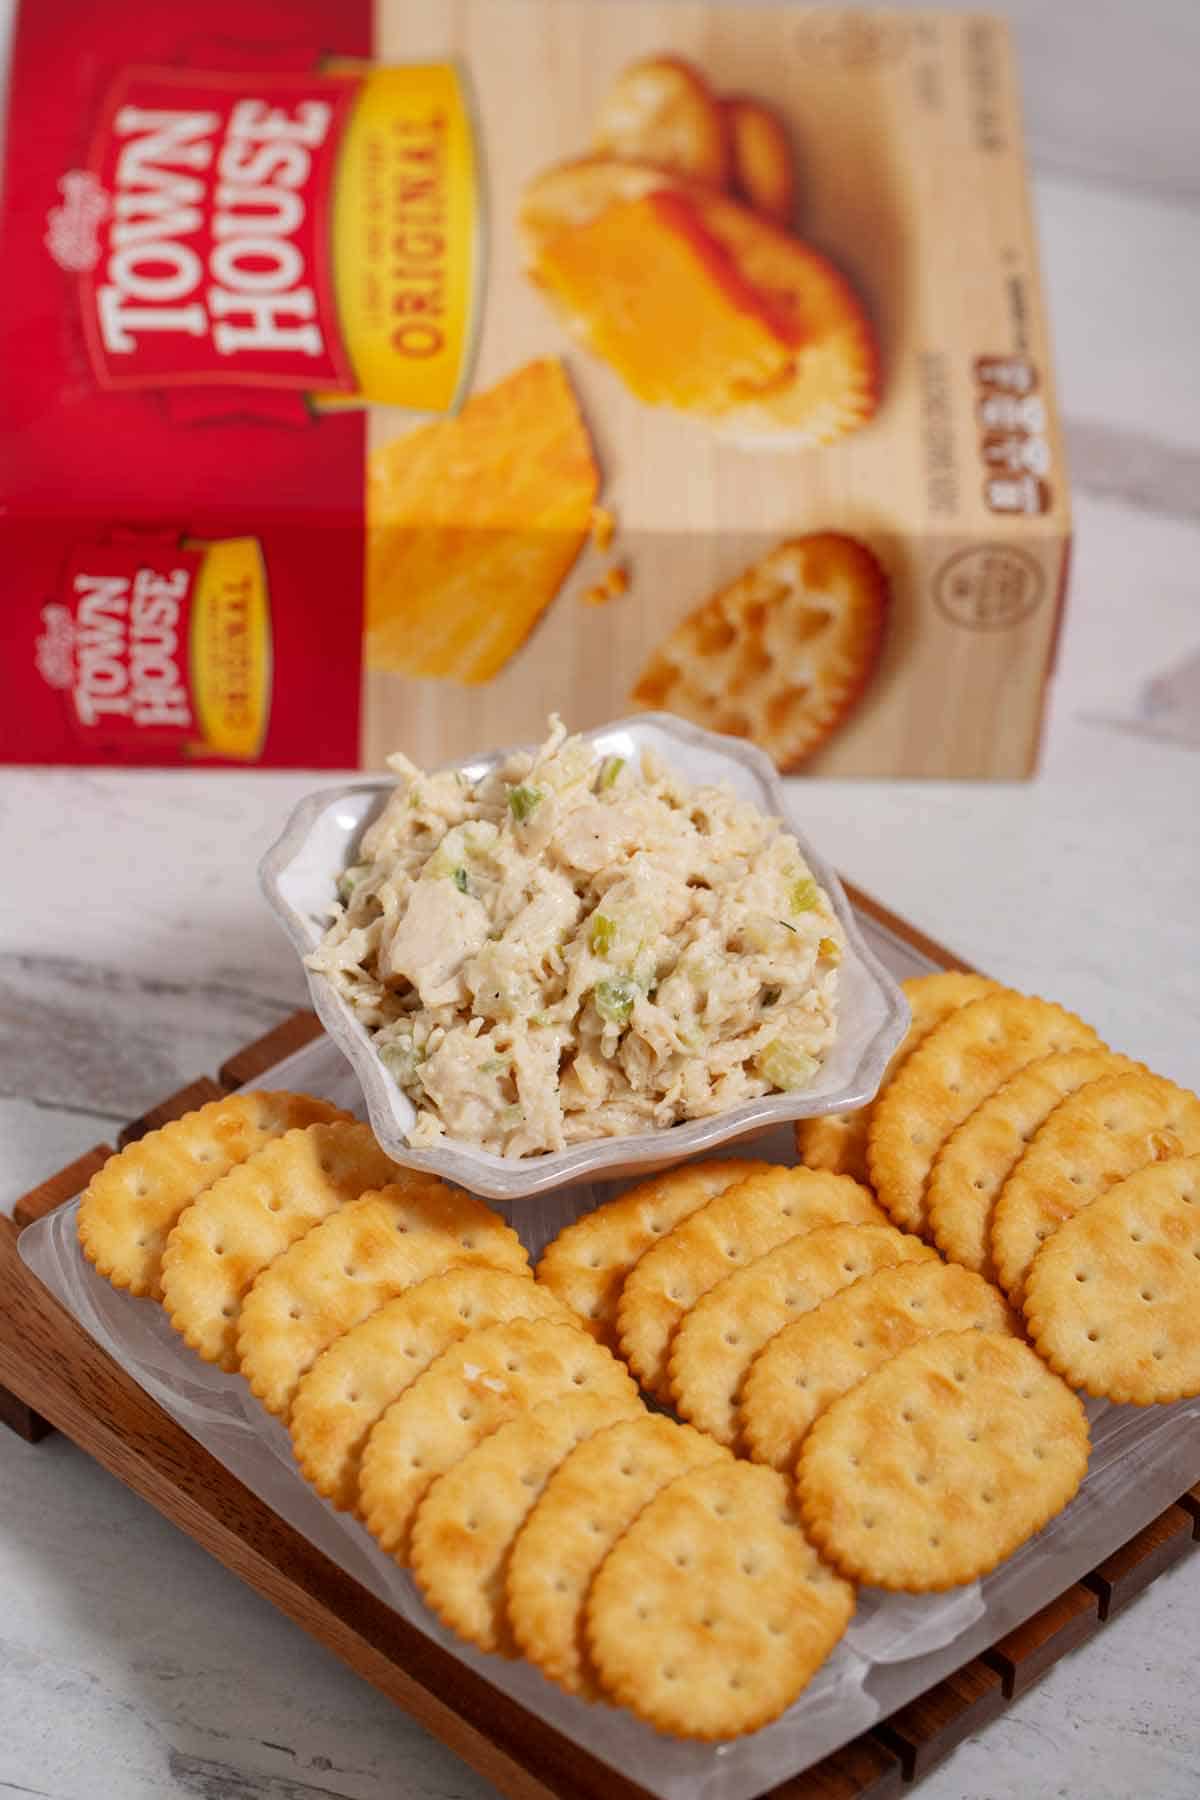 Town House original crackers on a plate with a bowl of chicken salad.